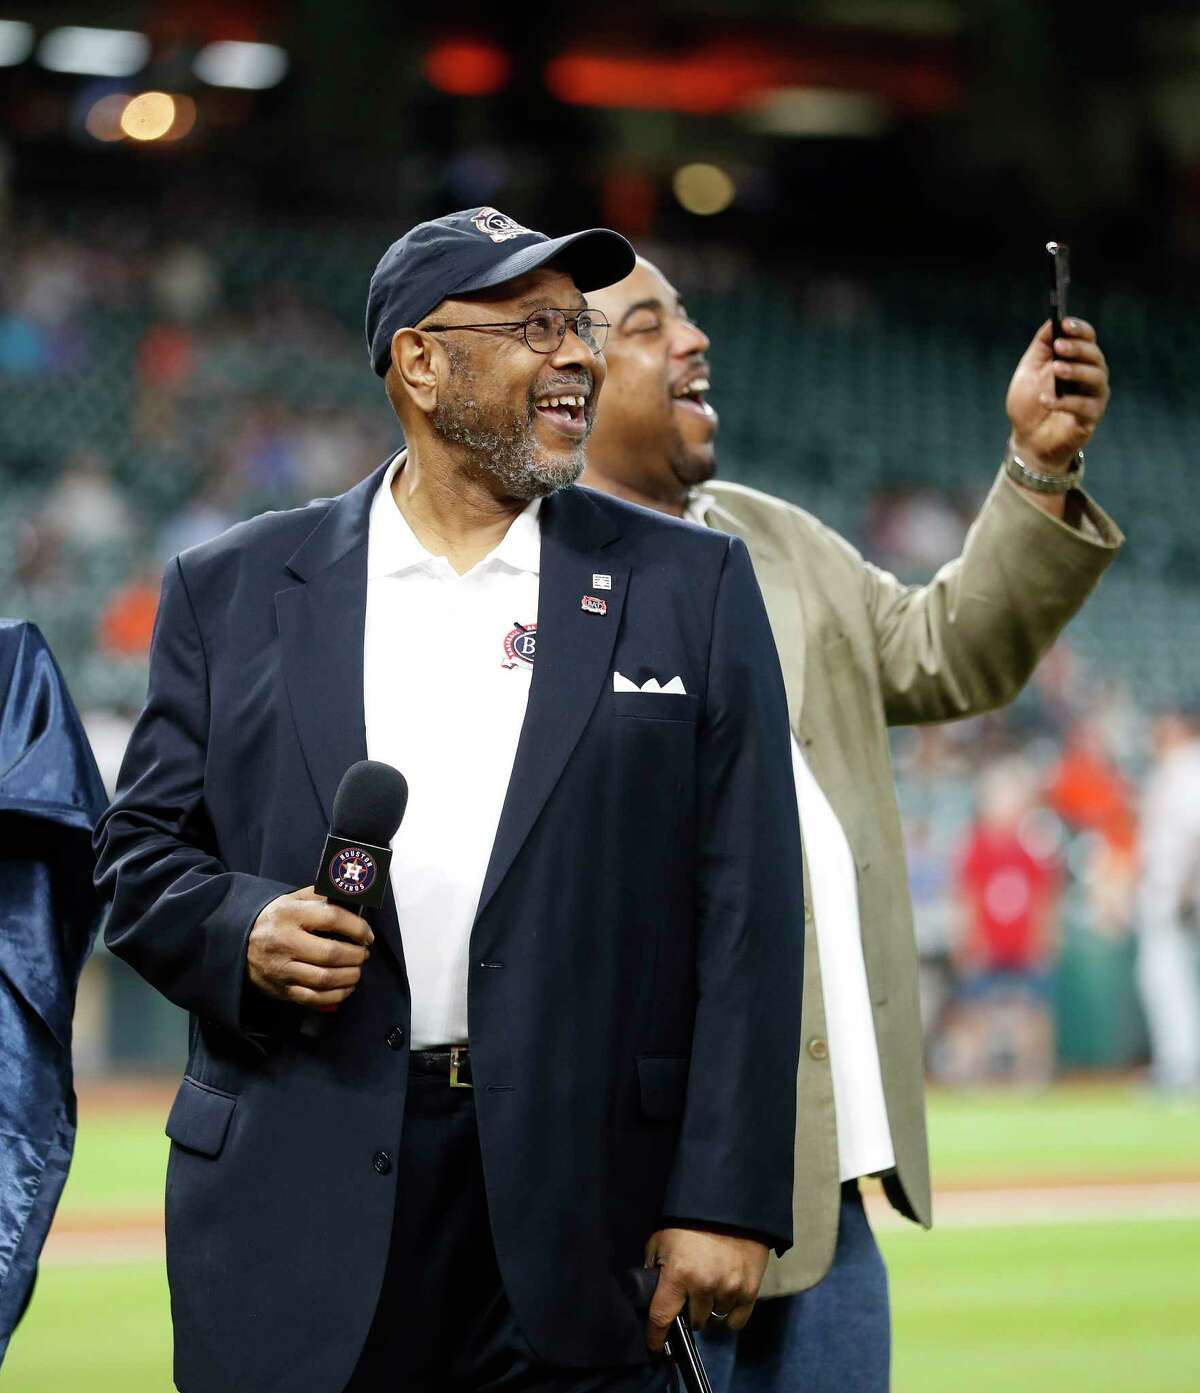 Bob Watson smiles as he watched a video tribute before being awarded the B.A.T. Lifetime Achievement award by MLB Commissioner Rob Manfred before the start of an MLB baseball game at Minute Maid Park, Tuesday, May 23, 2017.